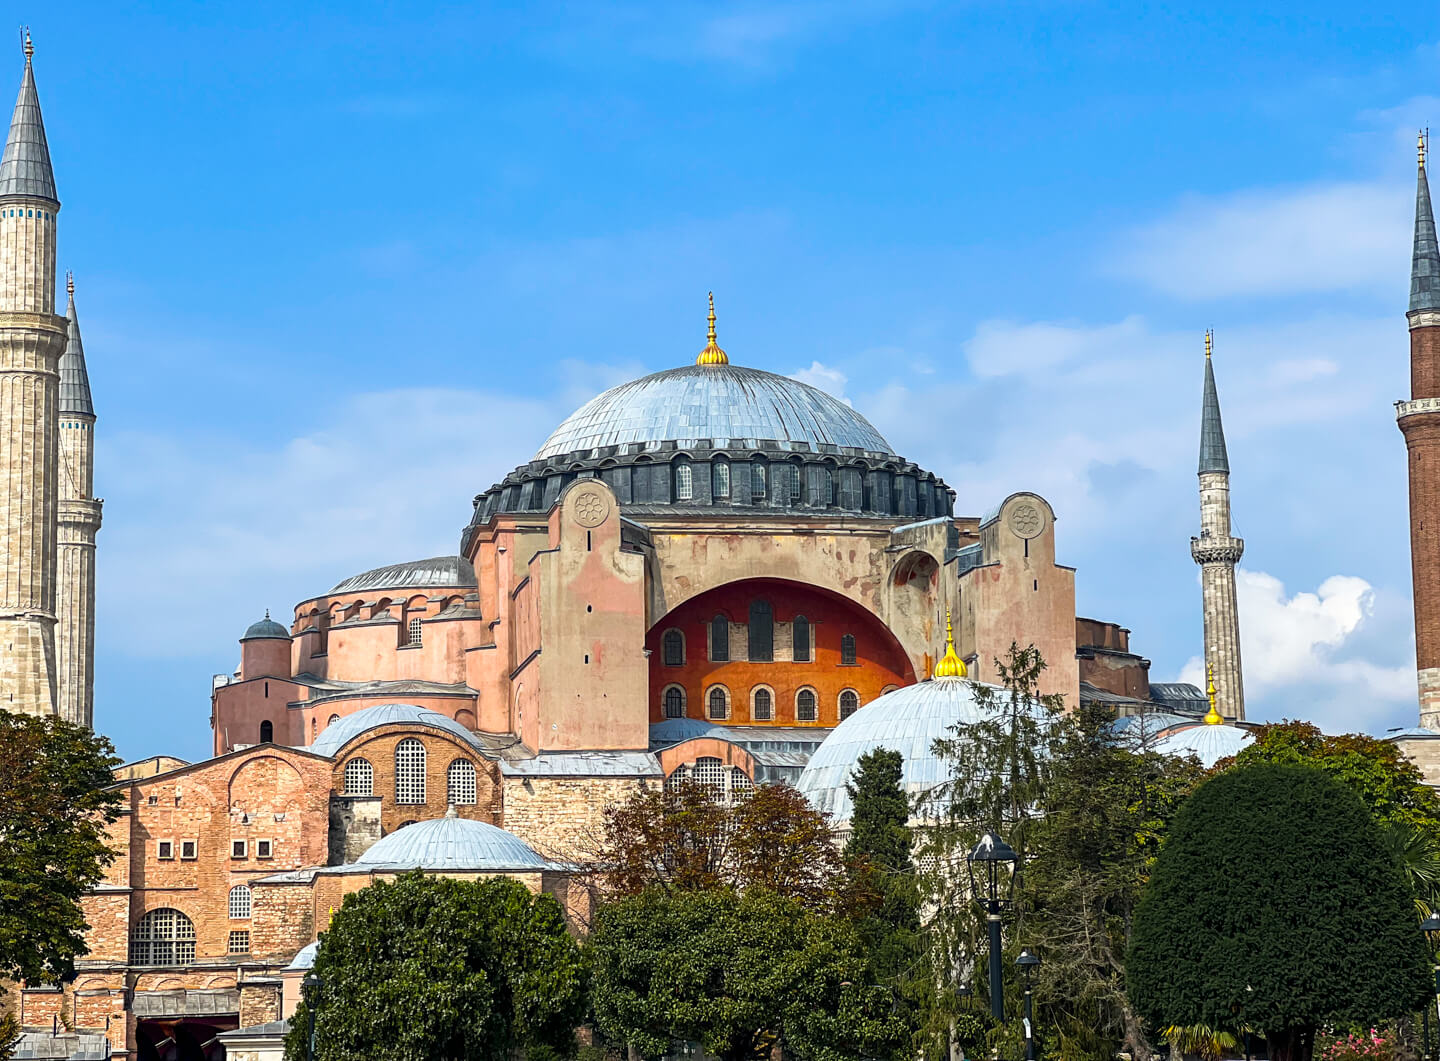 Hagia Sophia: Can't-miss on this 10 day turkey itinerary